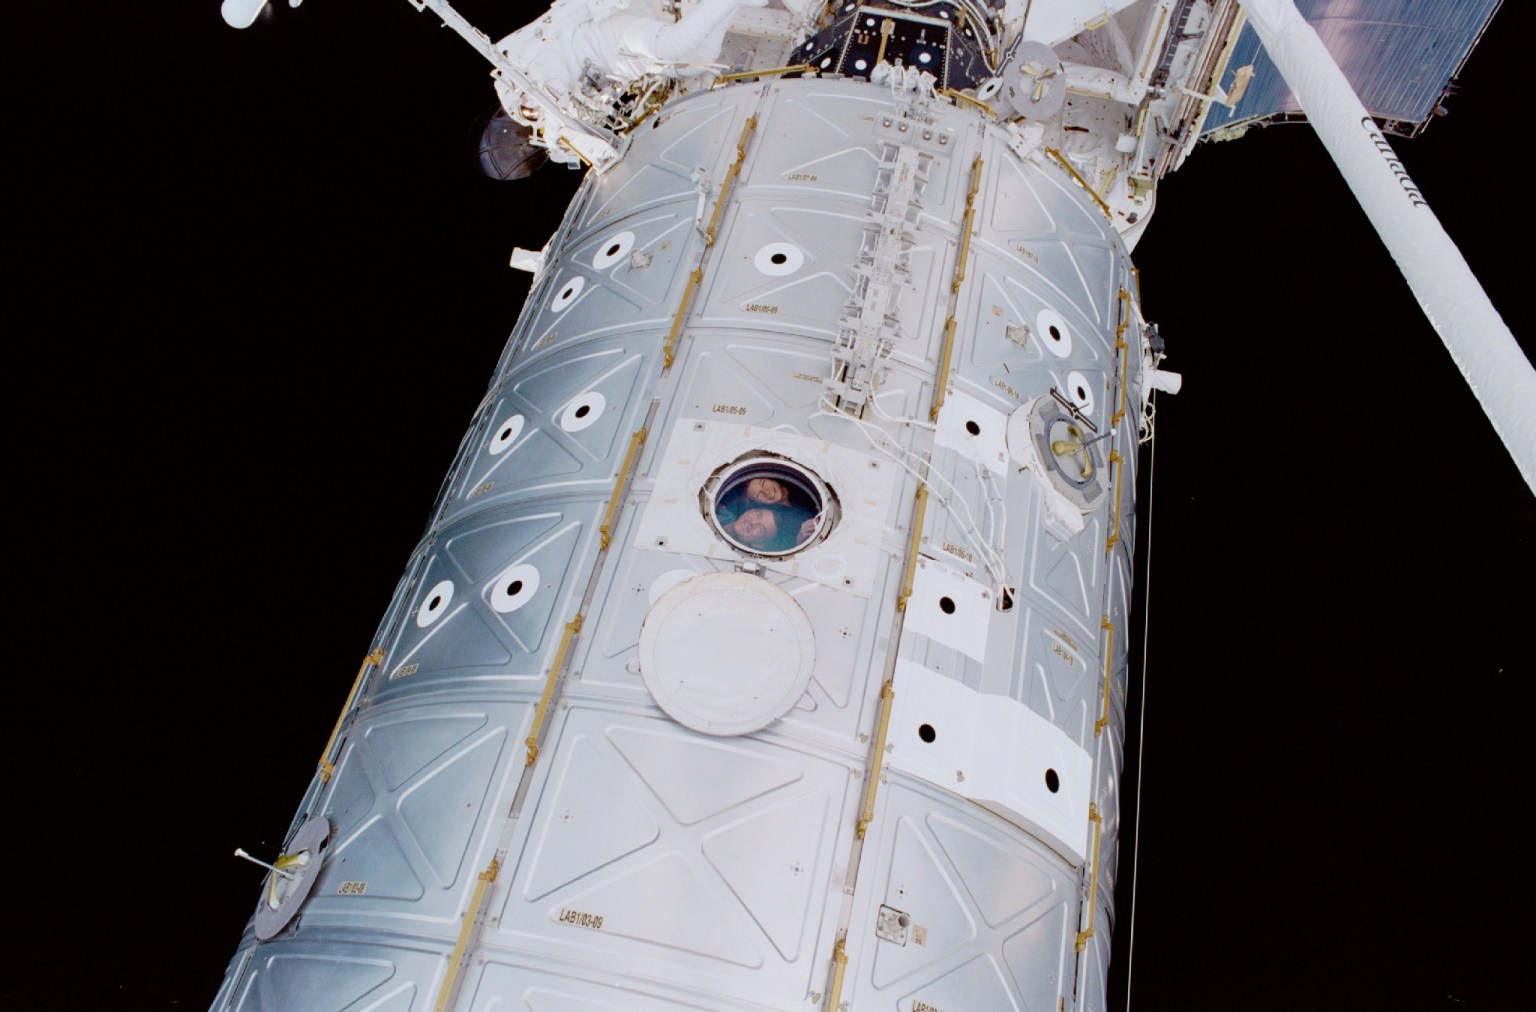 A close look at the window in this picture of the Destiny laboratory reveals the faces of astronauts Susan J. Helms and James S. Voss, flight engineers for the Expedition Two mission. One of the two STS-100 space walkers--astronauts Scott E. Parazynski and Chris A. Hadfield--exposed the image with a 35mm camera on one of two days of extravehicular activity (EVA) during the STS-100 mission.